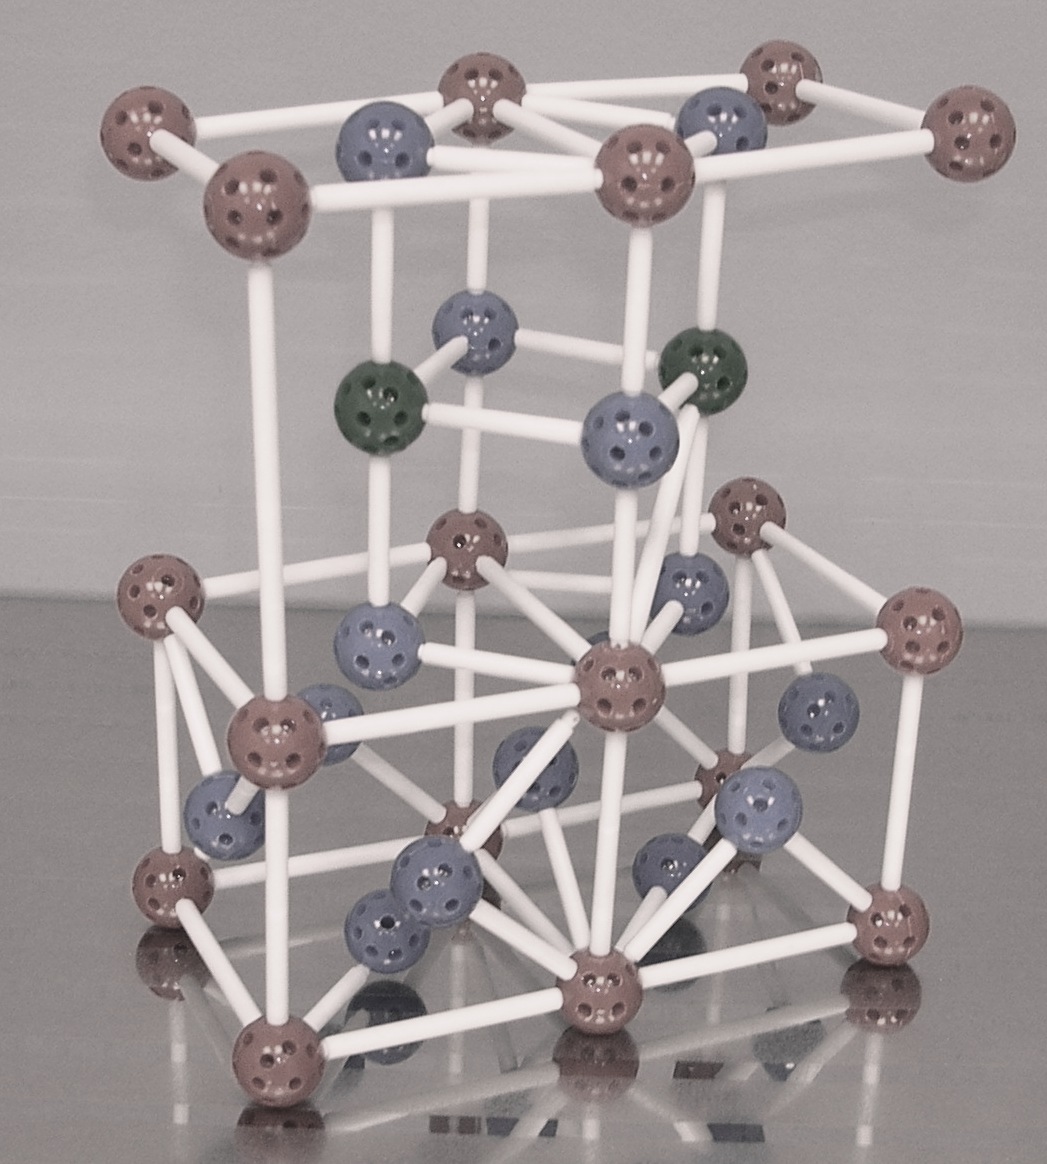 Model of crystallographic structure